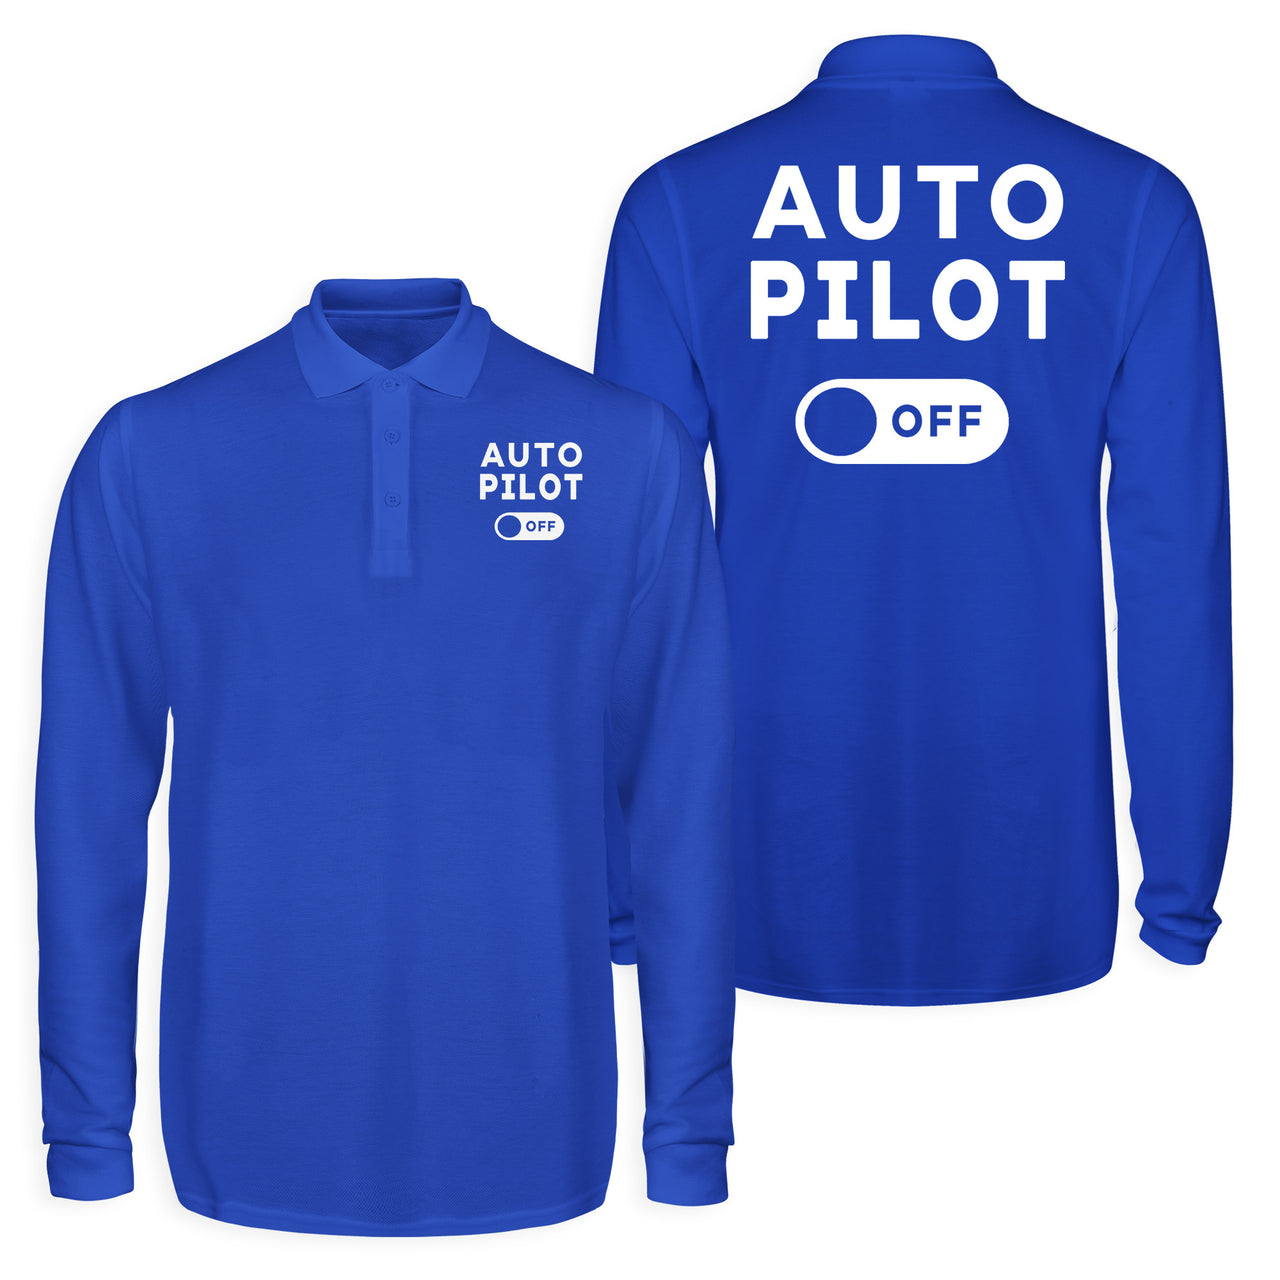 Auto Pilot Off Designed Long Sleeve Polo T-Shirts (Double-Side)